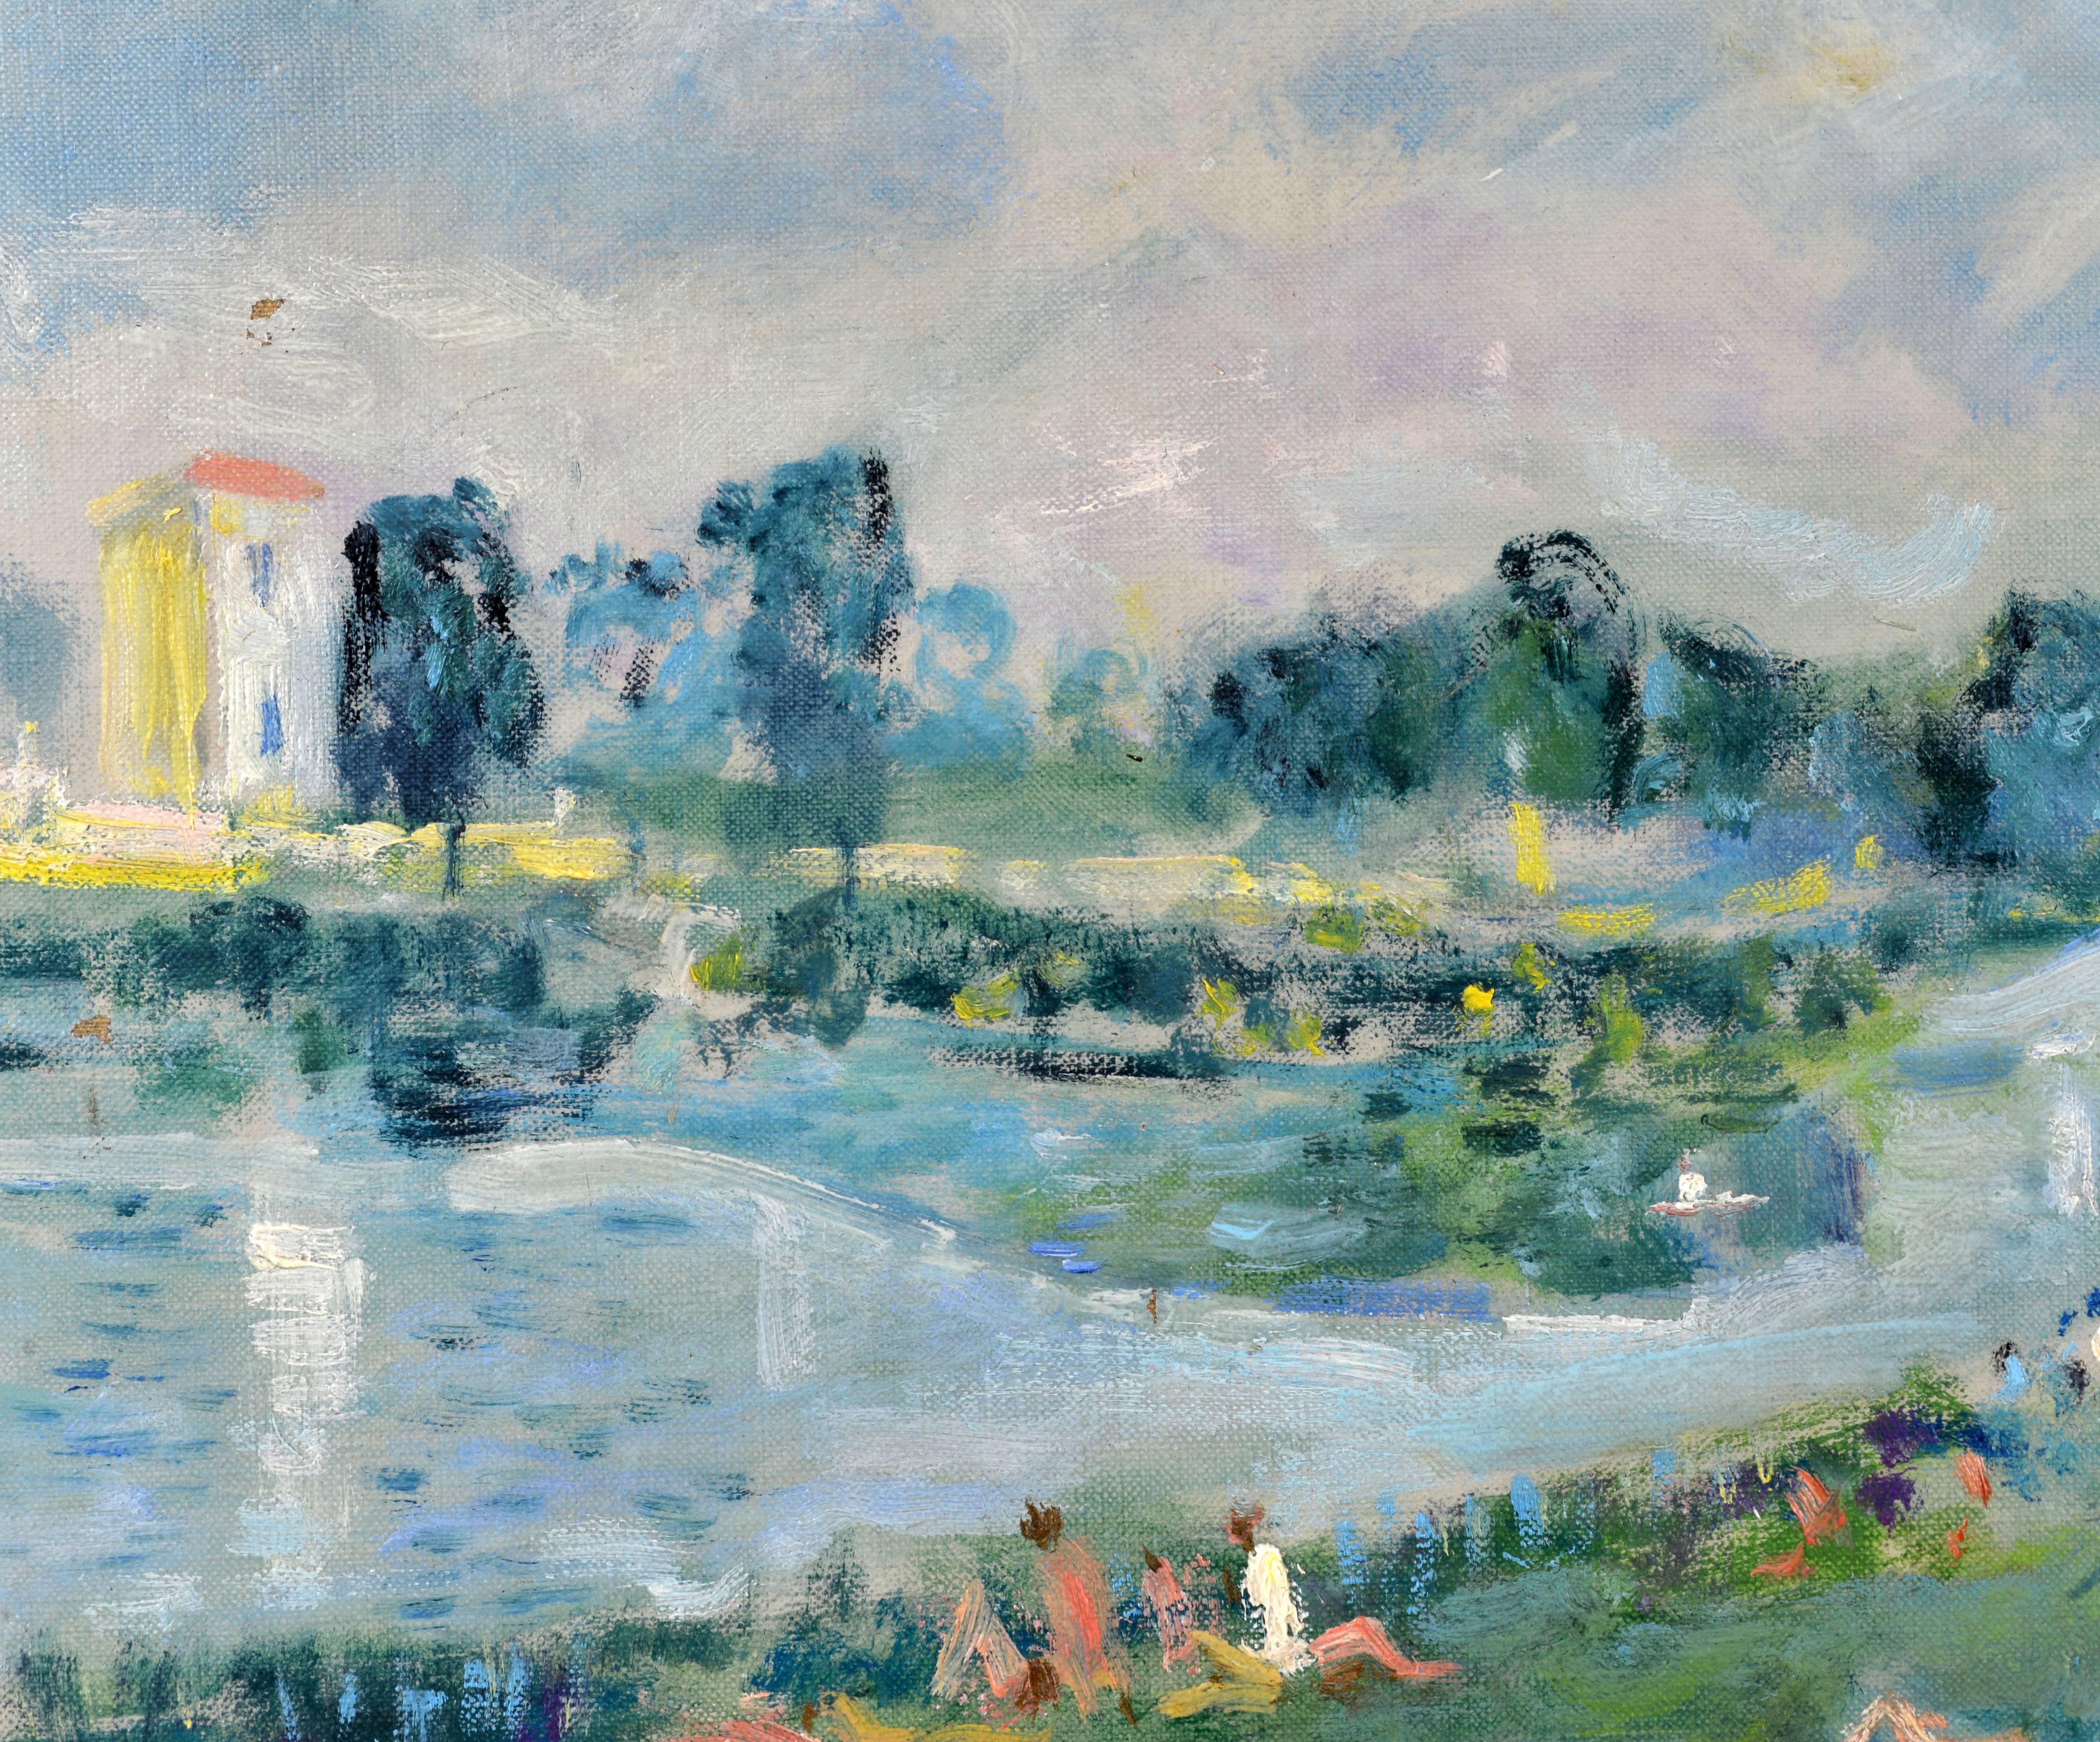 Painted Summer in the Park, Paris by Lucien Adrion, French Post Impressionist